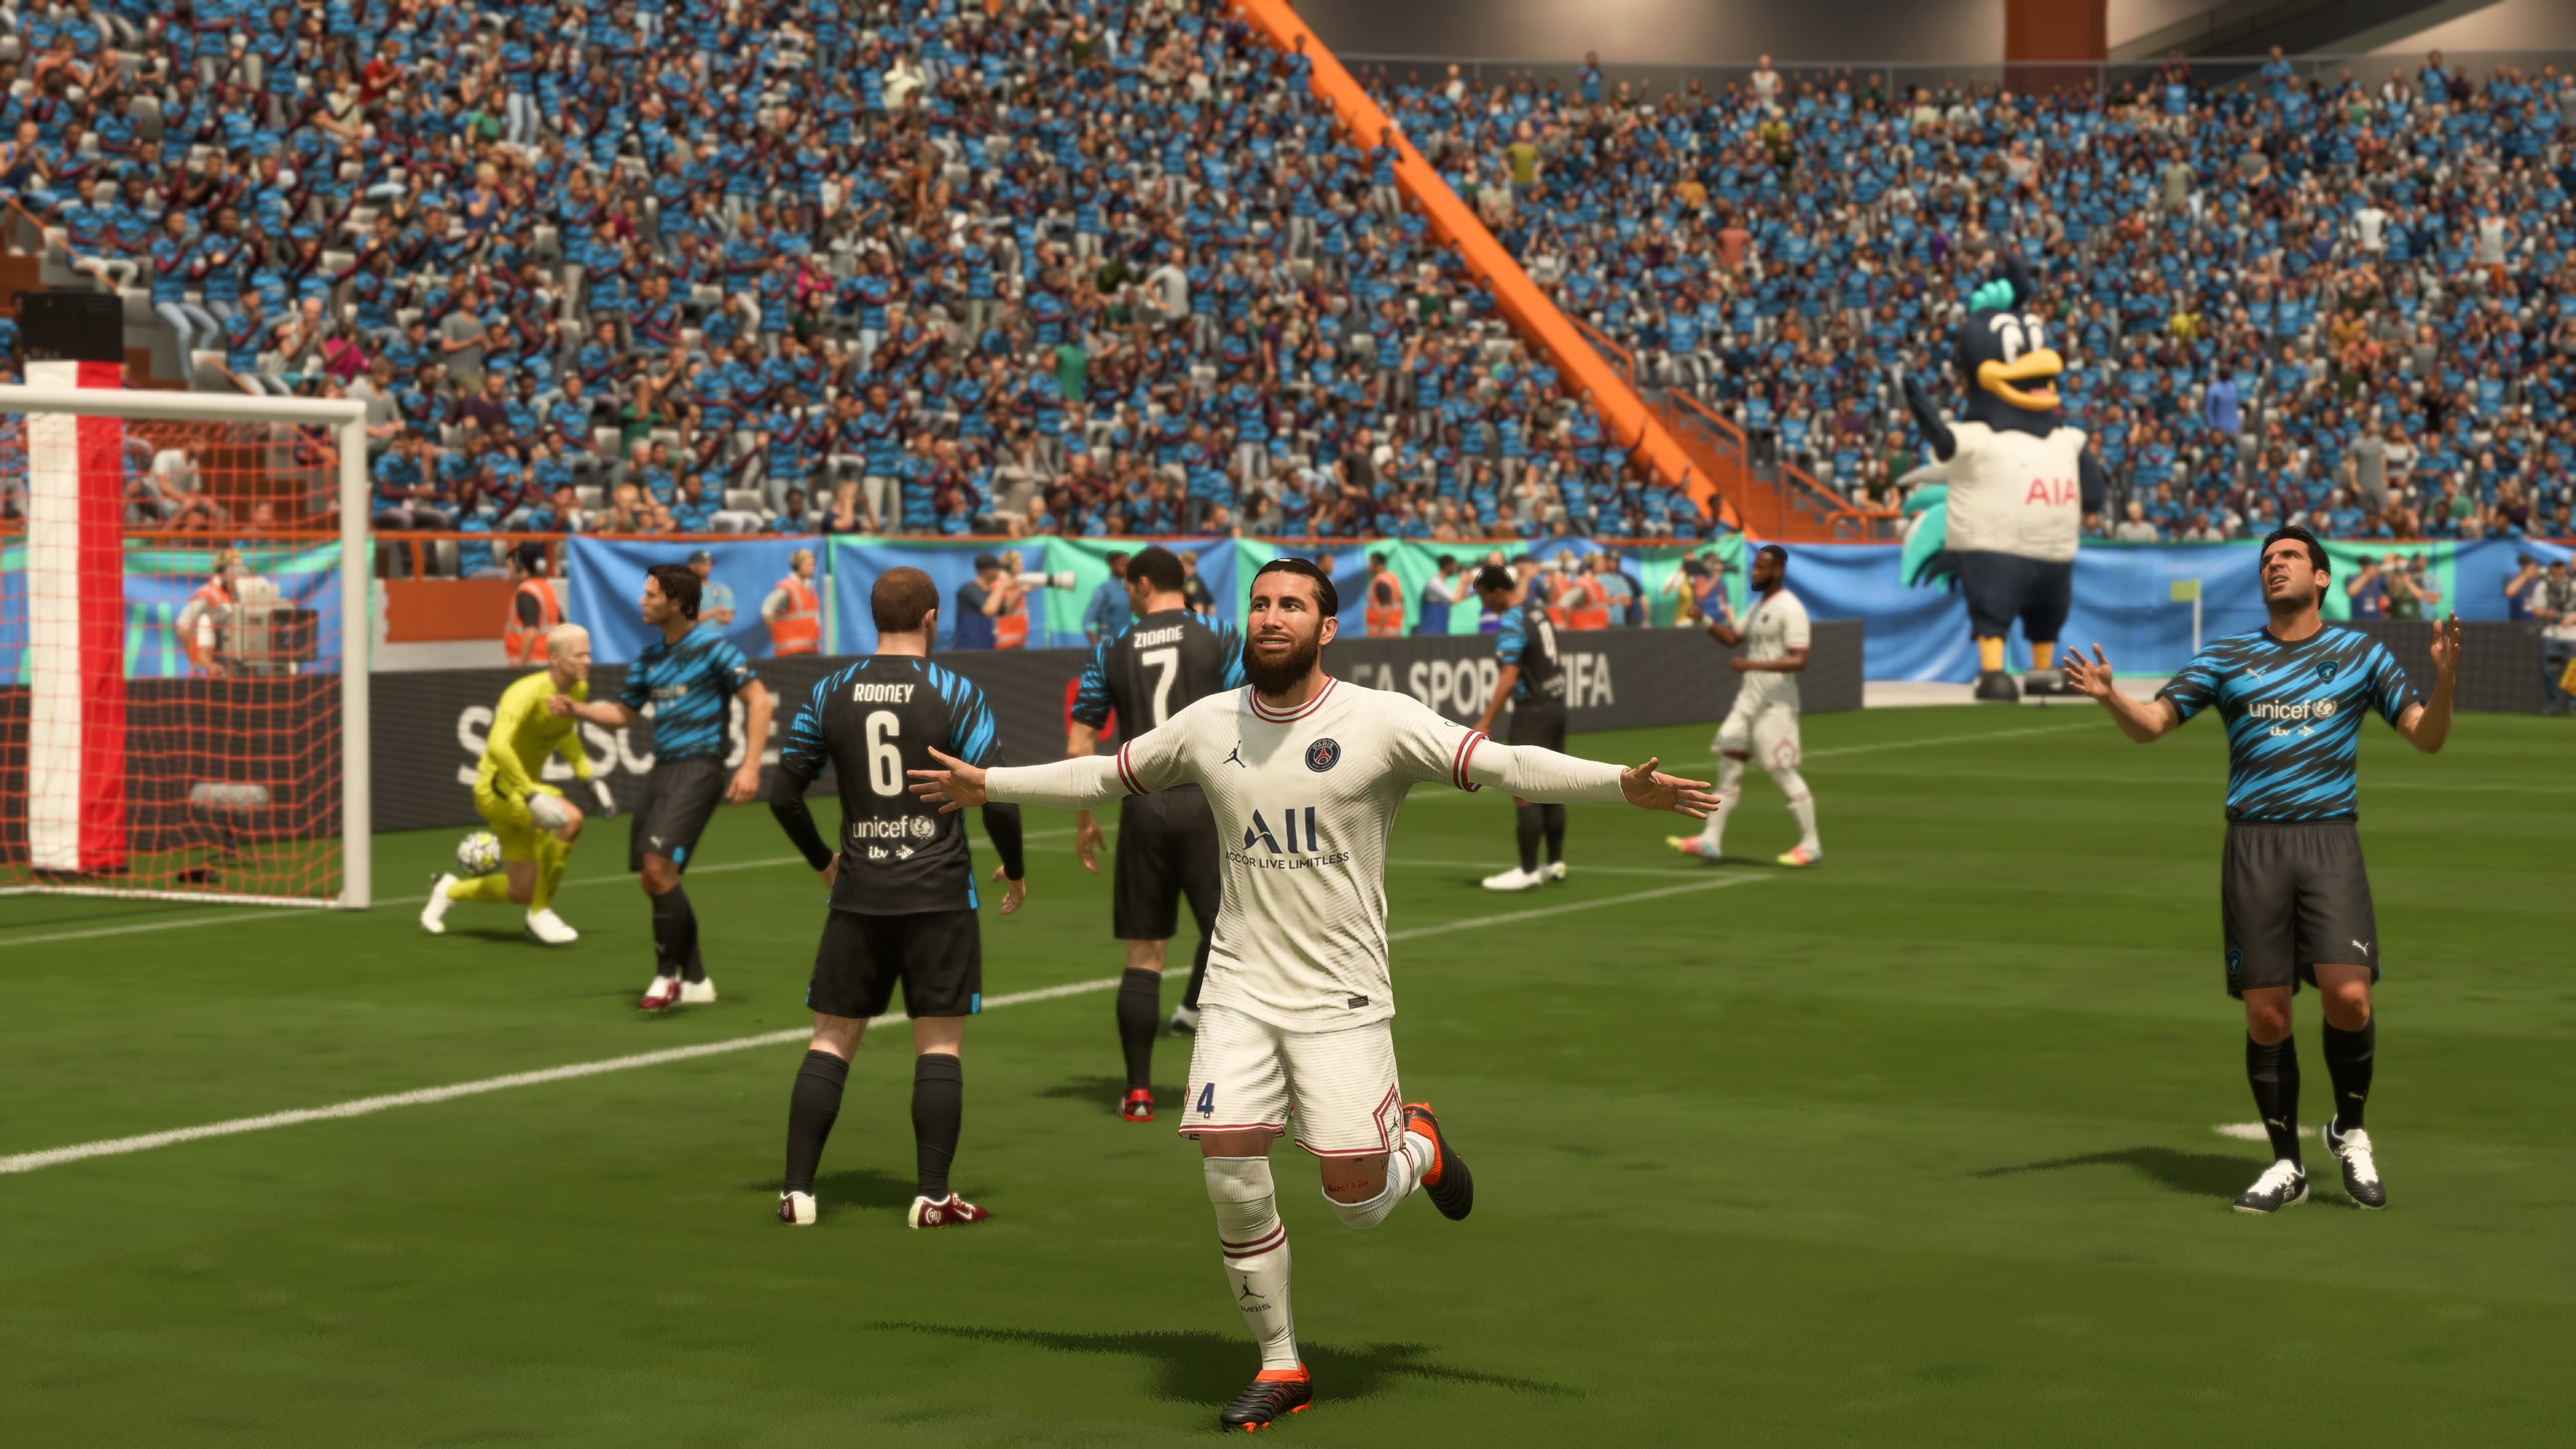 FIFA 23 - How to use FIFA Mod manager, Live Editor and Cheat